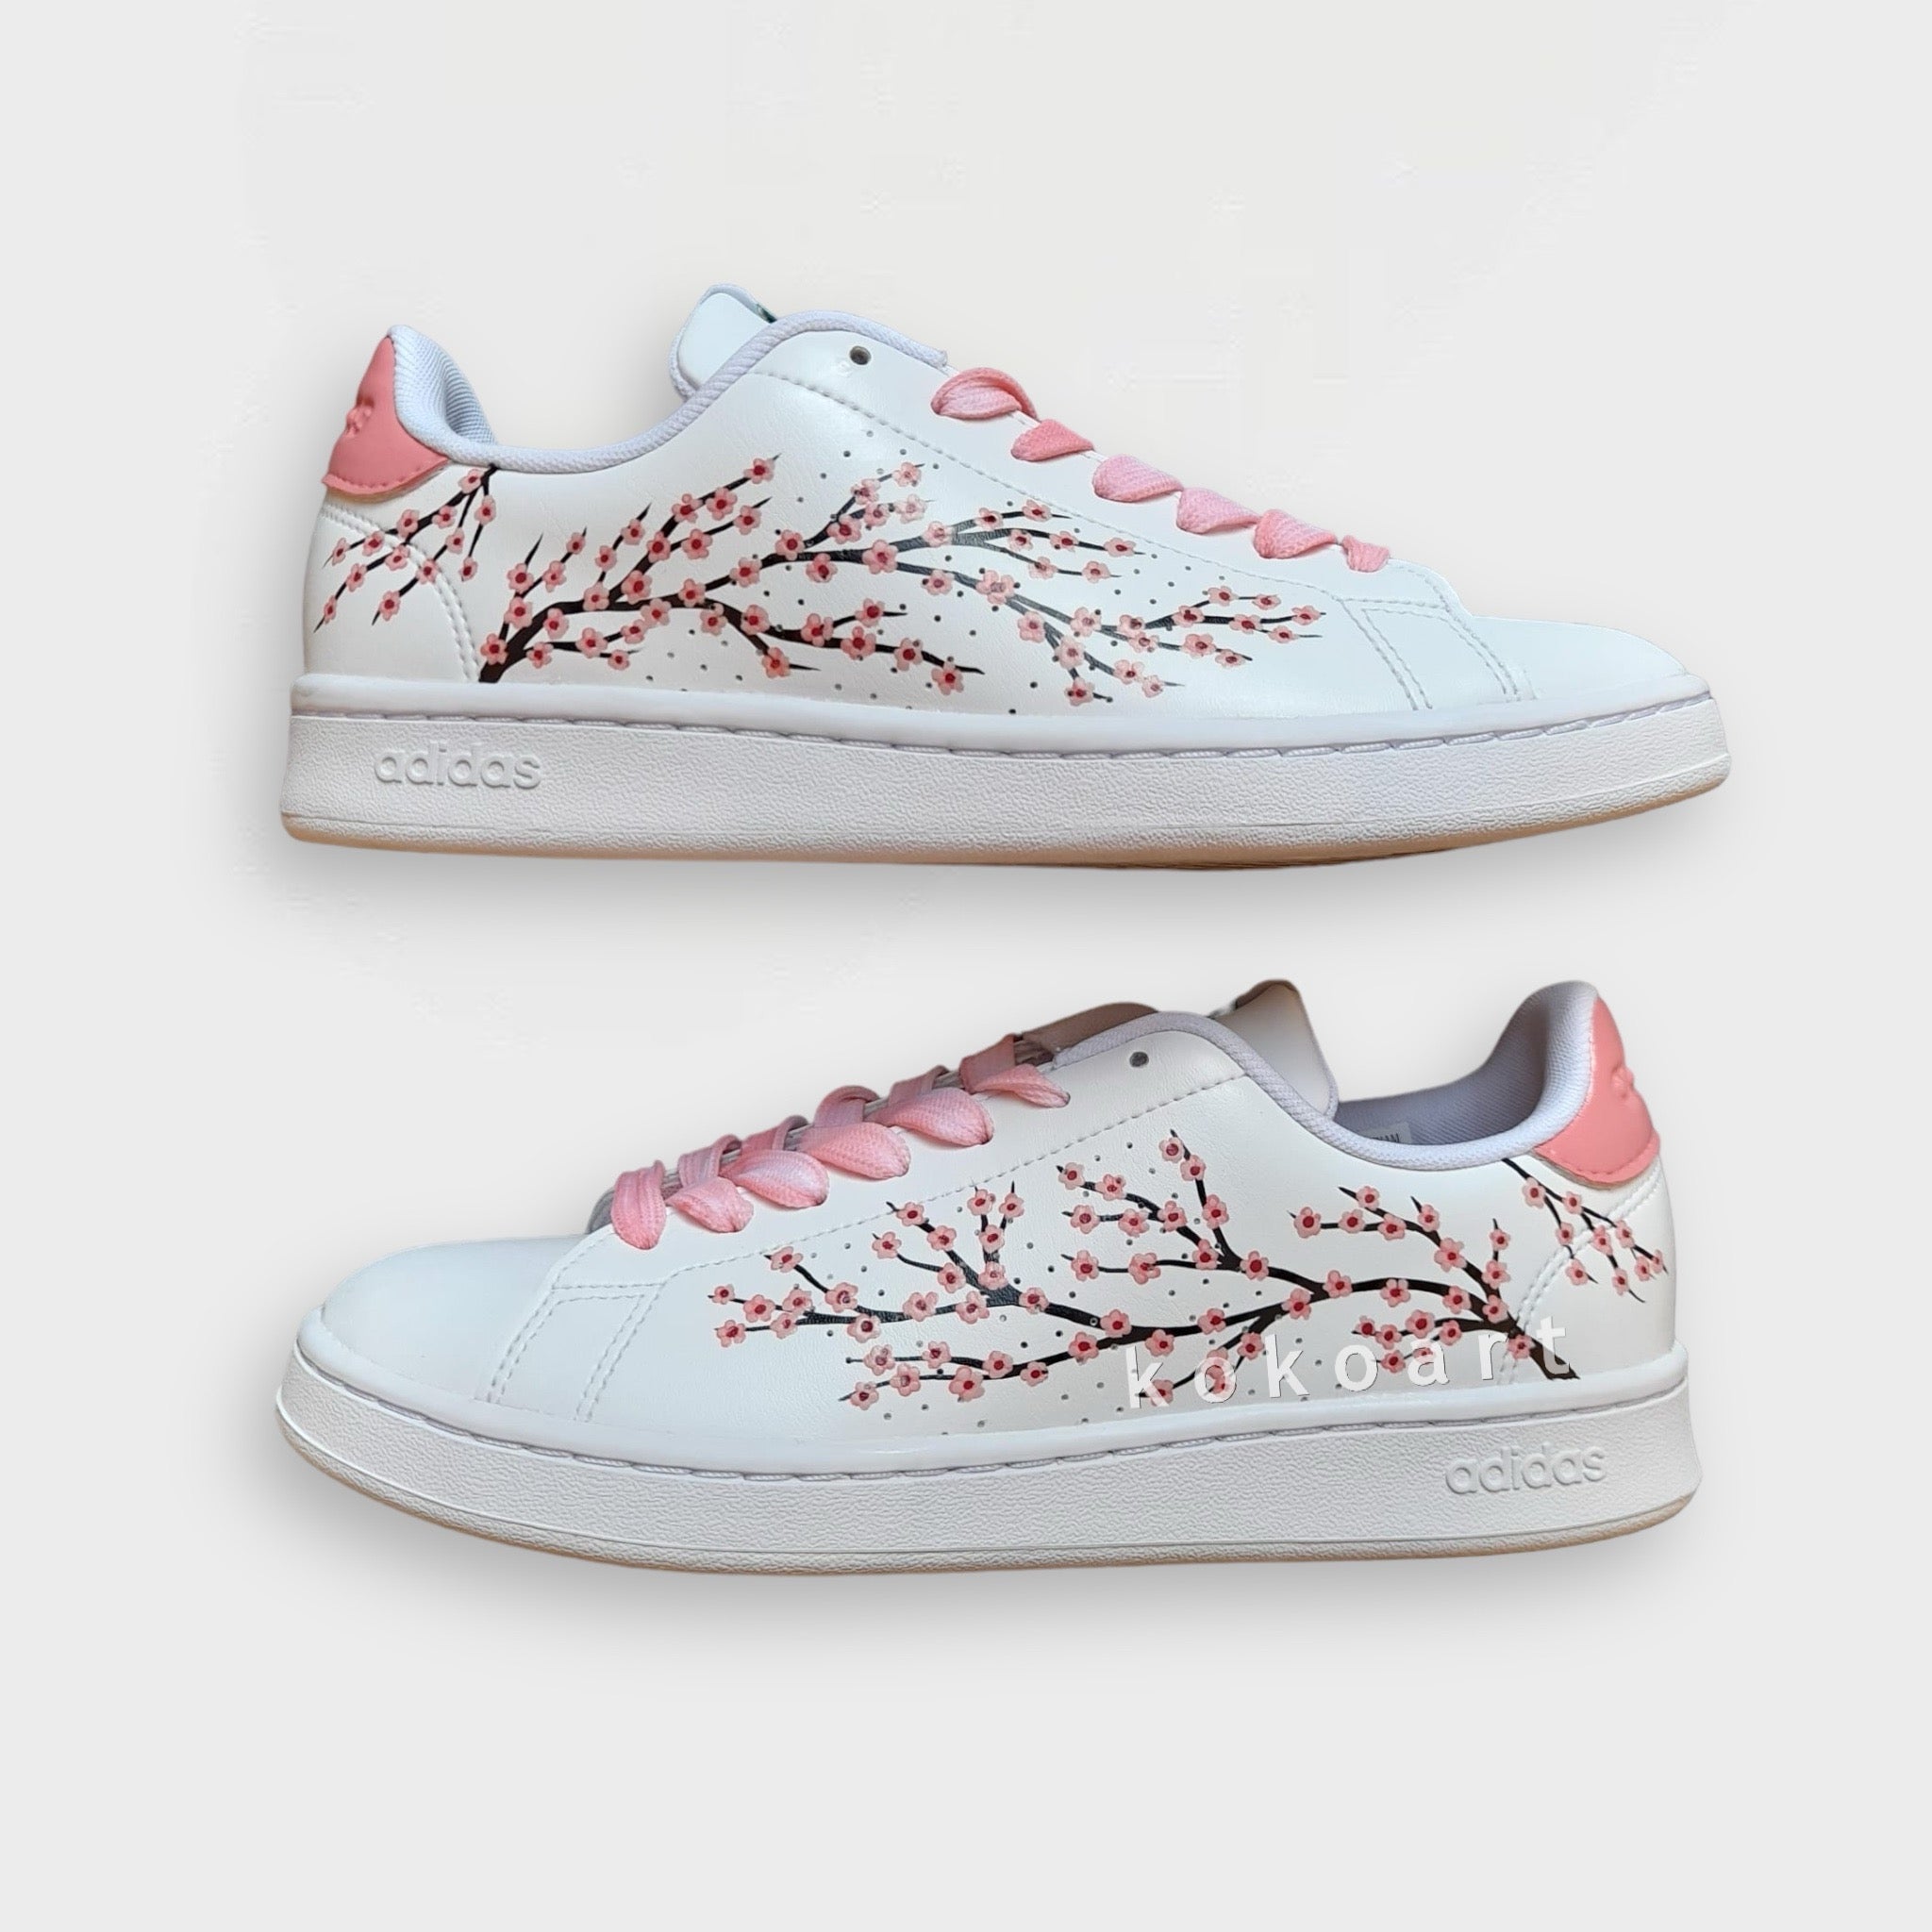 Stan Smith Hand Painted Cherry Blossom